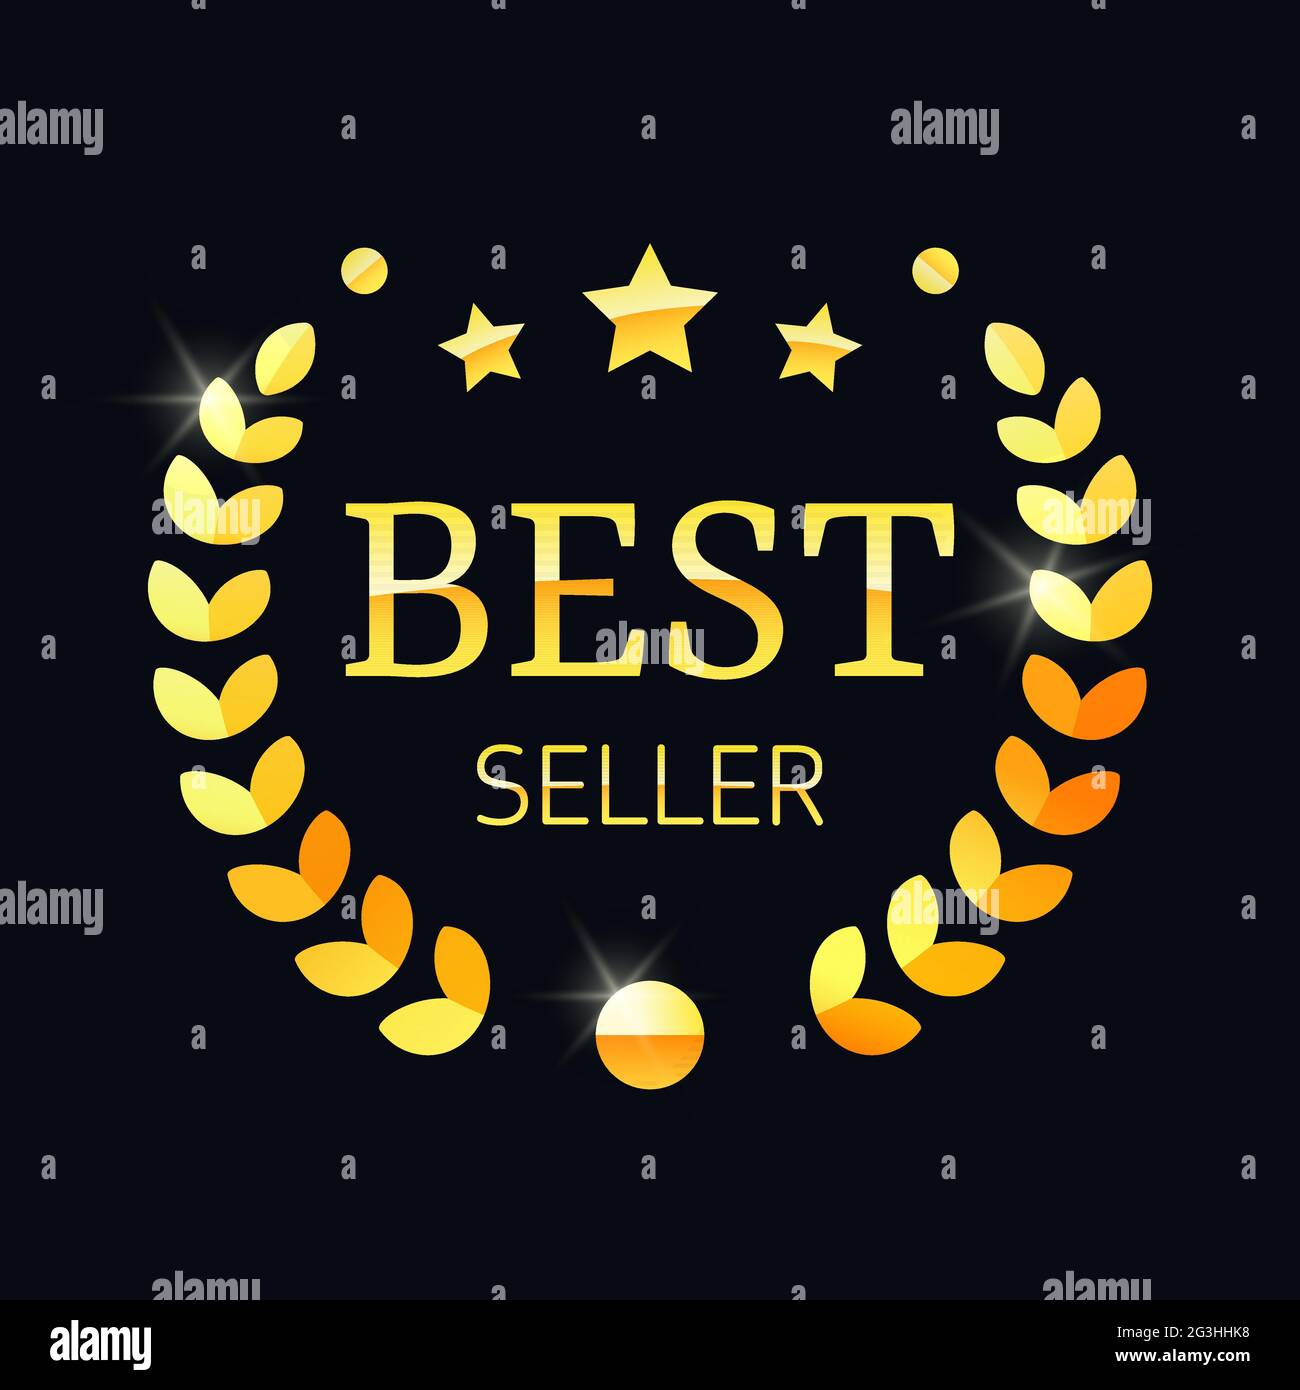 Best seller gold sign label template Royalty Free Vector